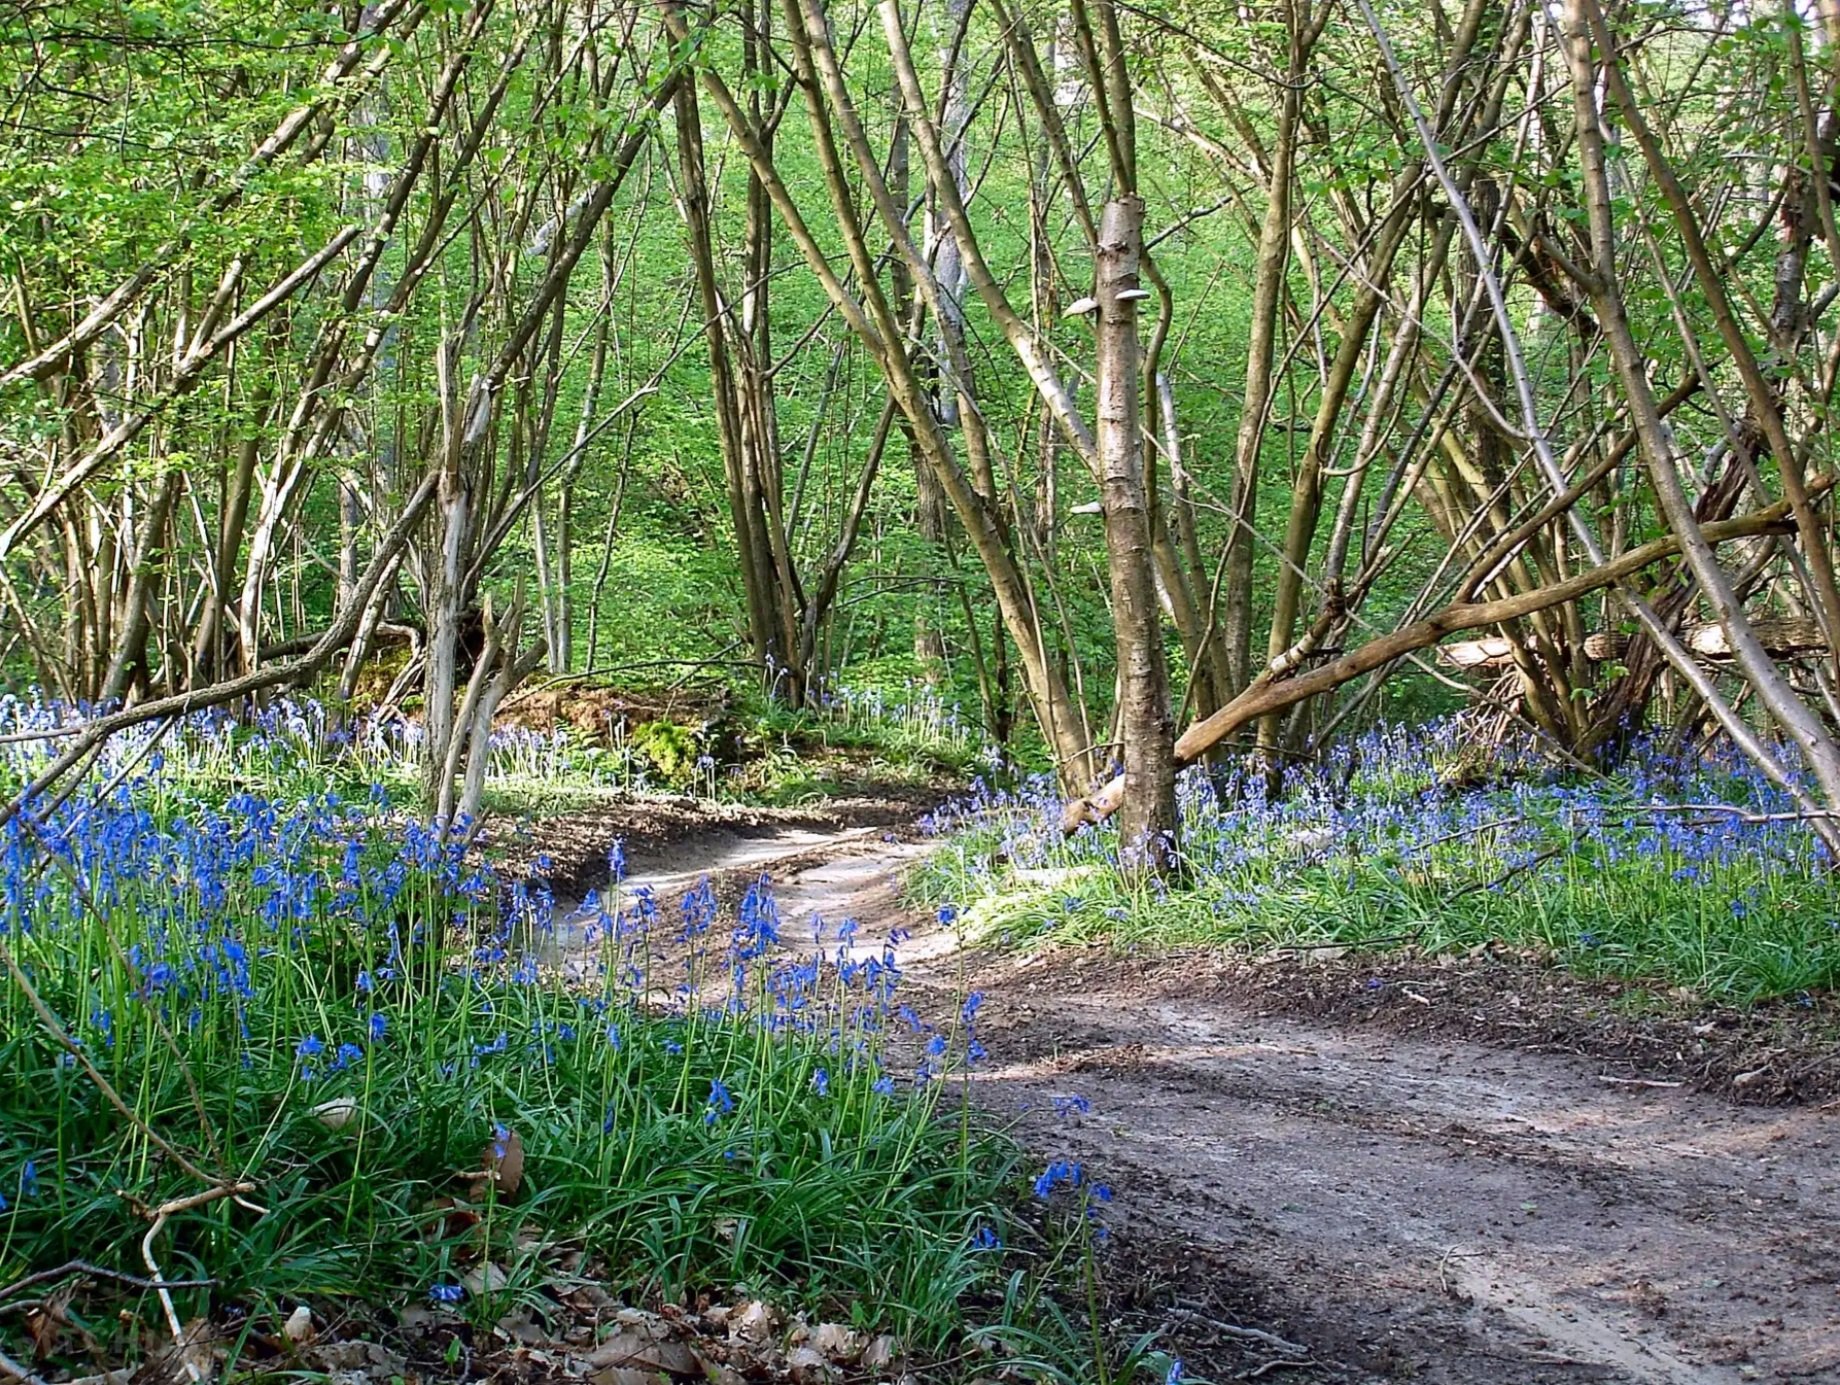 Bluebells+in+the+woods+Strictly+Camping.jpg